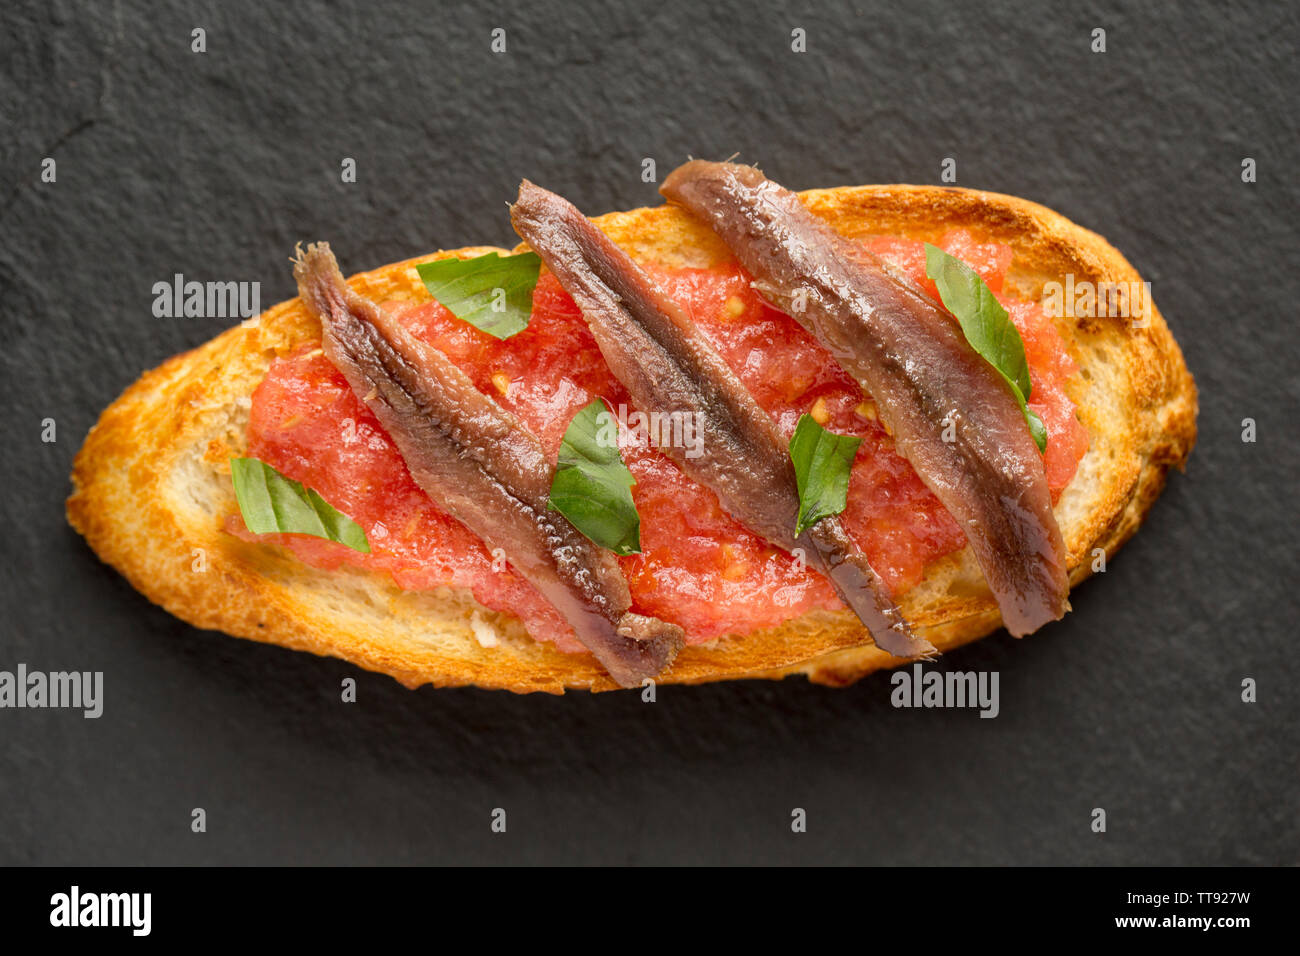 An example of Bruschetta which is an Italian dish comprising of grilled bread, olive oil and garlic with various toppings. In this case the bread has Stock Photo